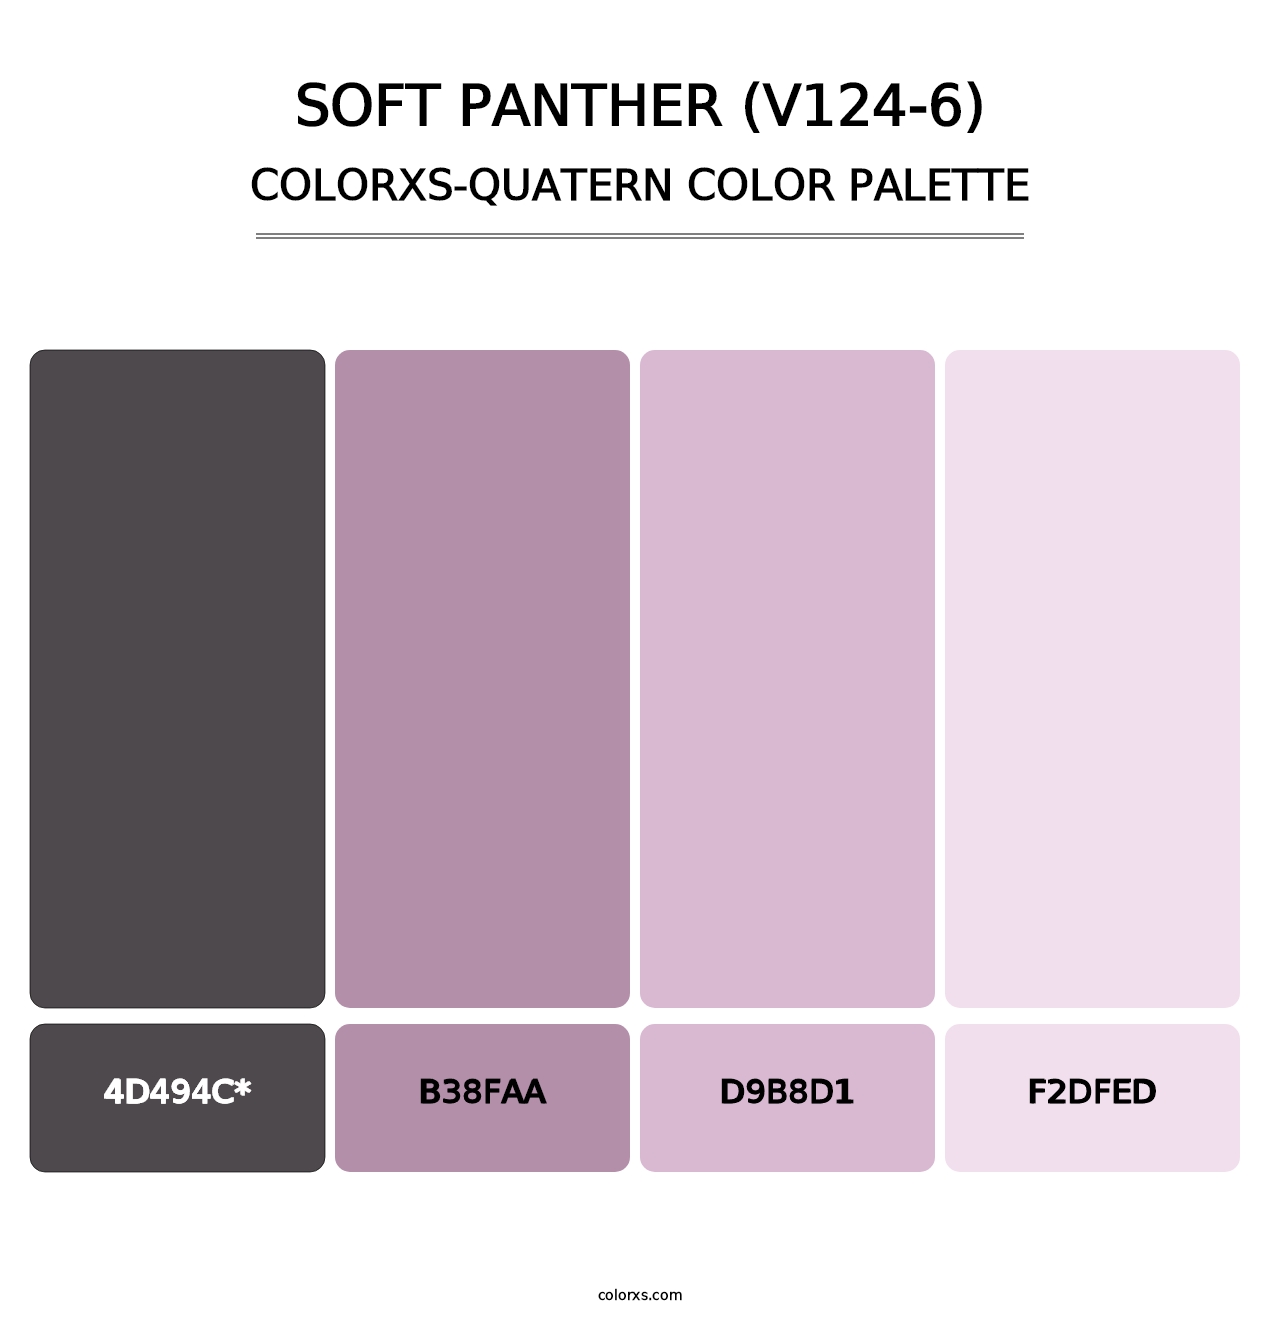 Soft Panther (V124-6) - Colorxs Quatern Palette